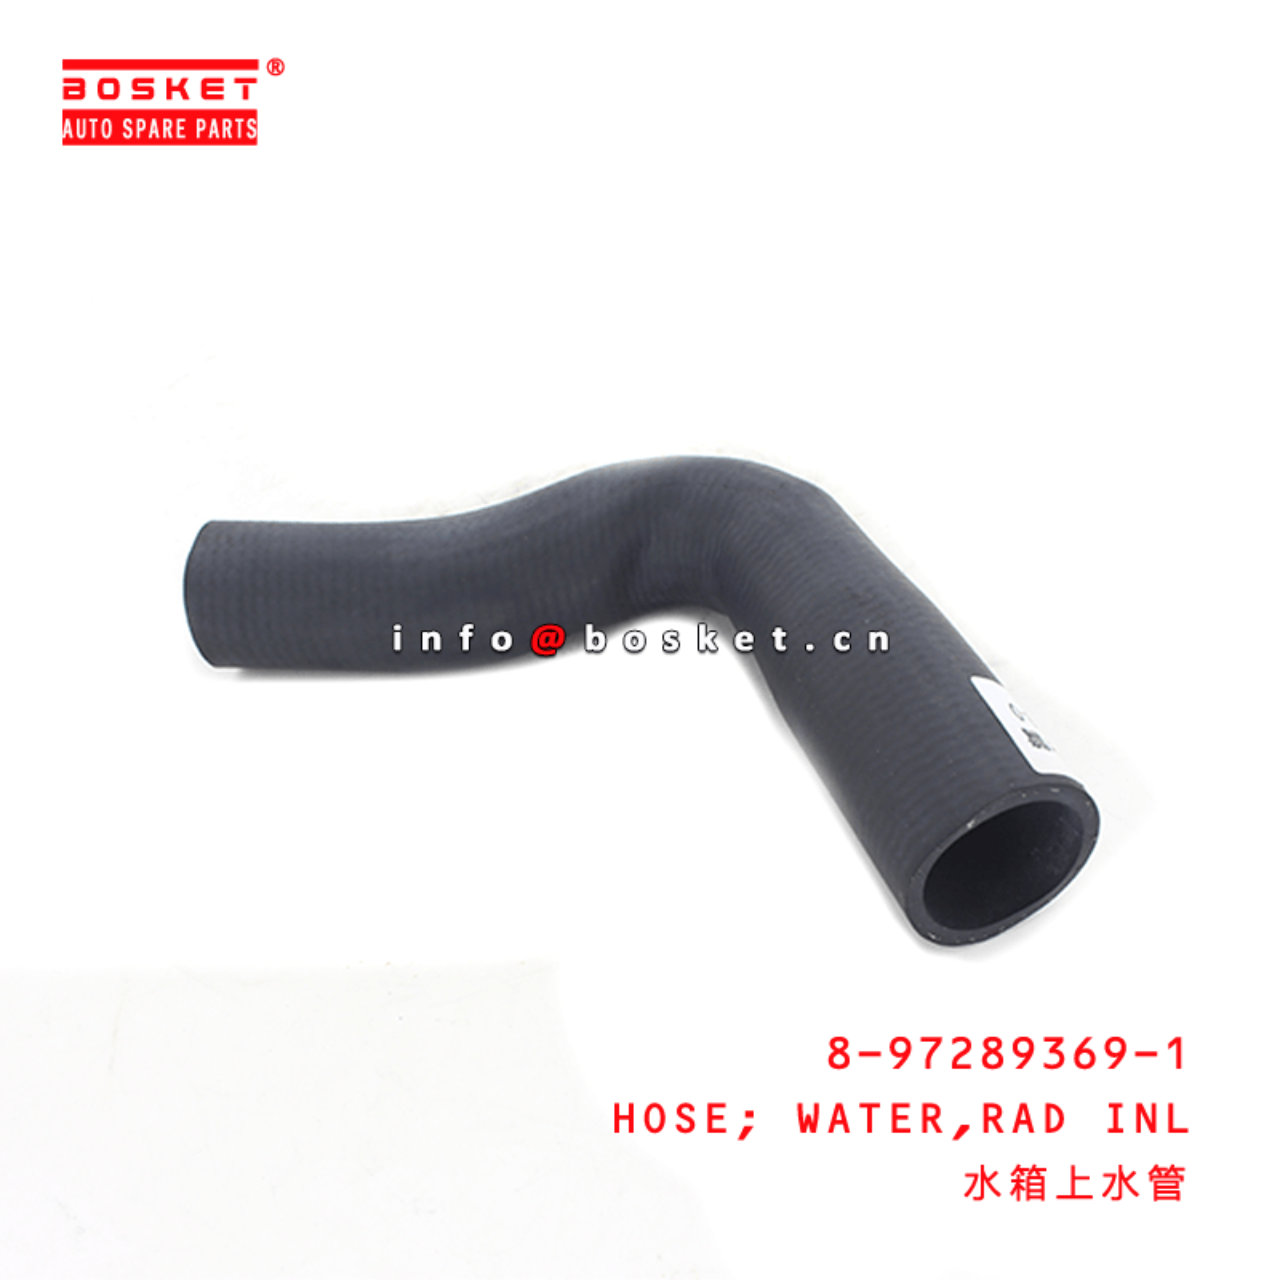  8-97289369-1 Radiator Inlet Water Hose 8972893691 Suitable for ISUZU NKR77 4JH1